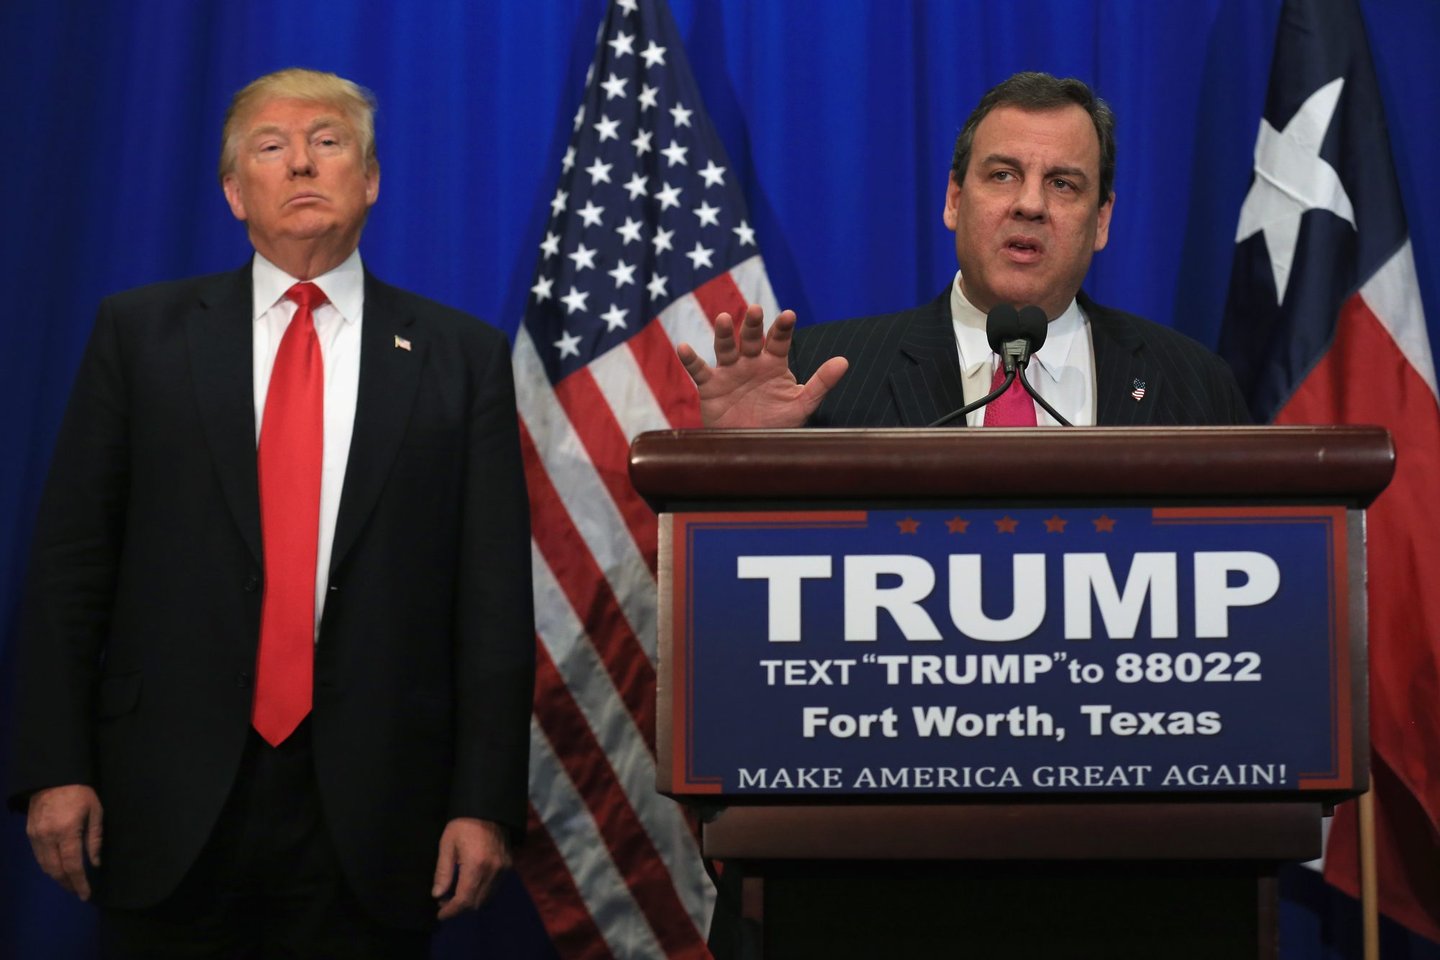 FORT WORTH, TX - FEBRUARY 26: New Jersey Governor Chris Christie announces his support for Republican presidential candidate Donald Trump during a rally at the Fort Worth Convention Center on February 26, 2016 in Fort Worth, Texas. Trump is campaigning in Texas, days ahead of the Super Tuesday primary. (Photo by Tom Pennington/Getty Images)